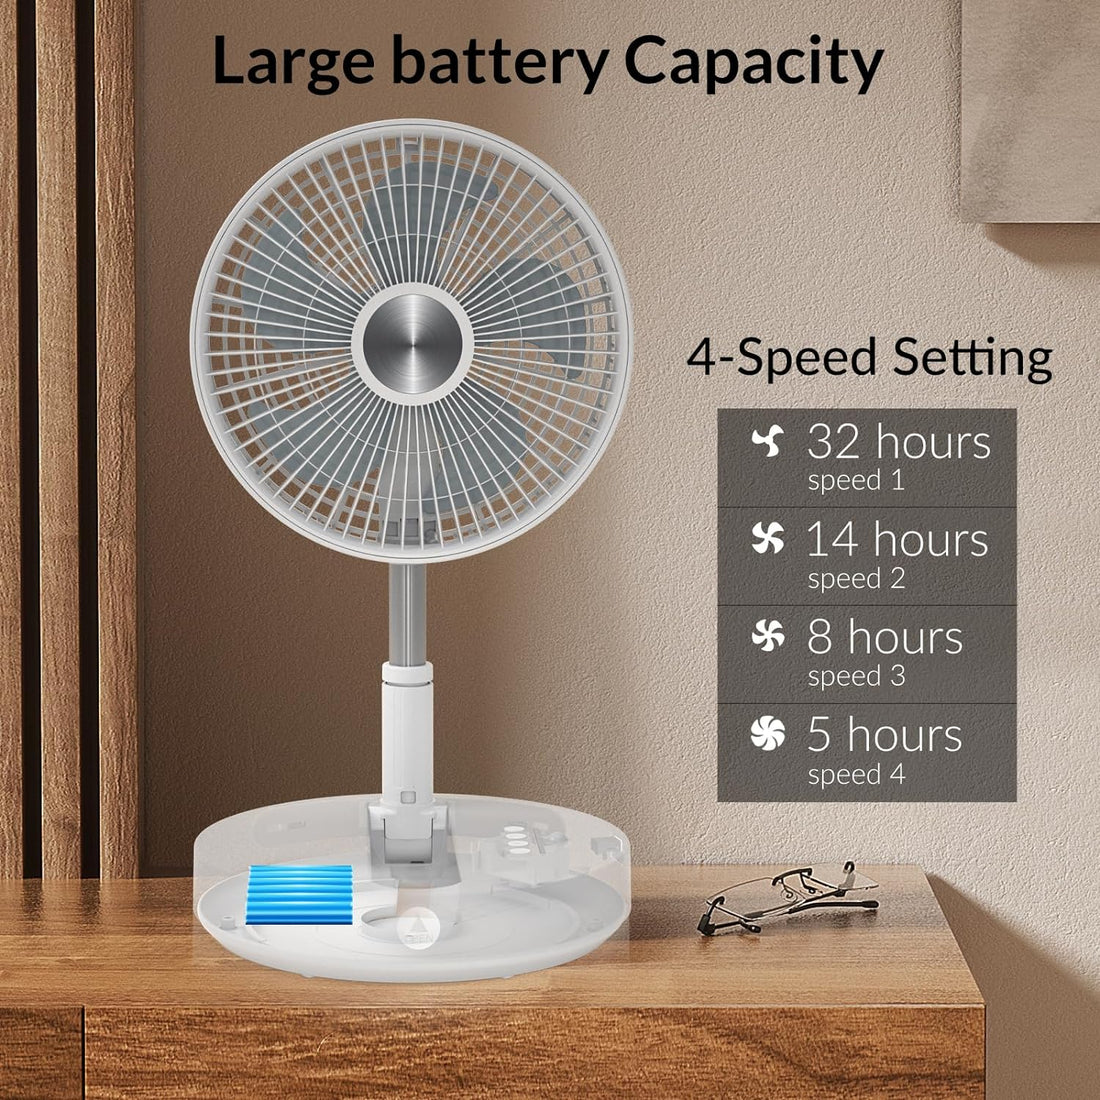 Primevolve 10" Portable Oscillating Fan, Up to 32 Hours Battery Operated Fan with Remote, Foldaway Fan with Adjustable Height, 4 Speeds & Timer, Rechargeable Fan for Bedroom Camping Travel